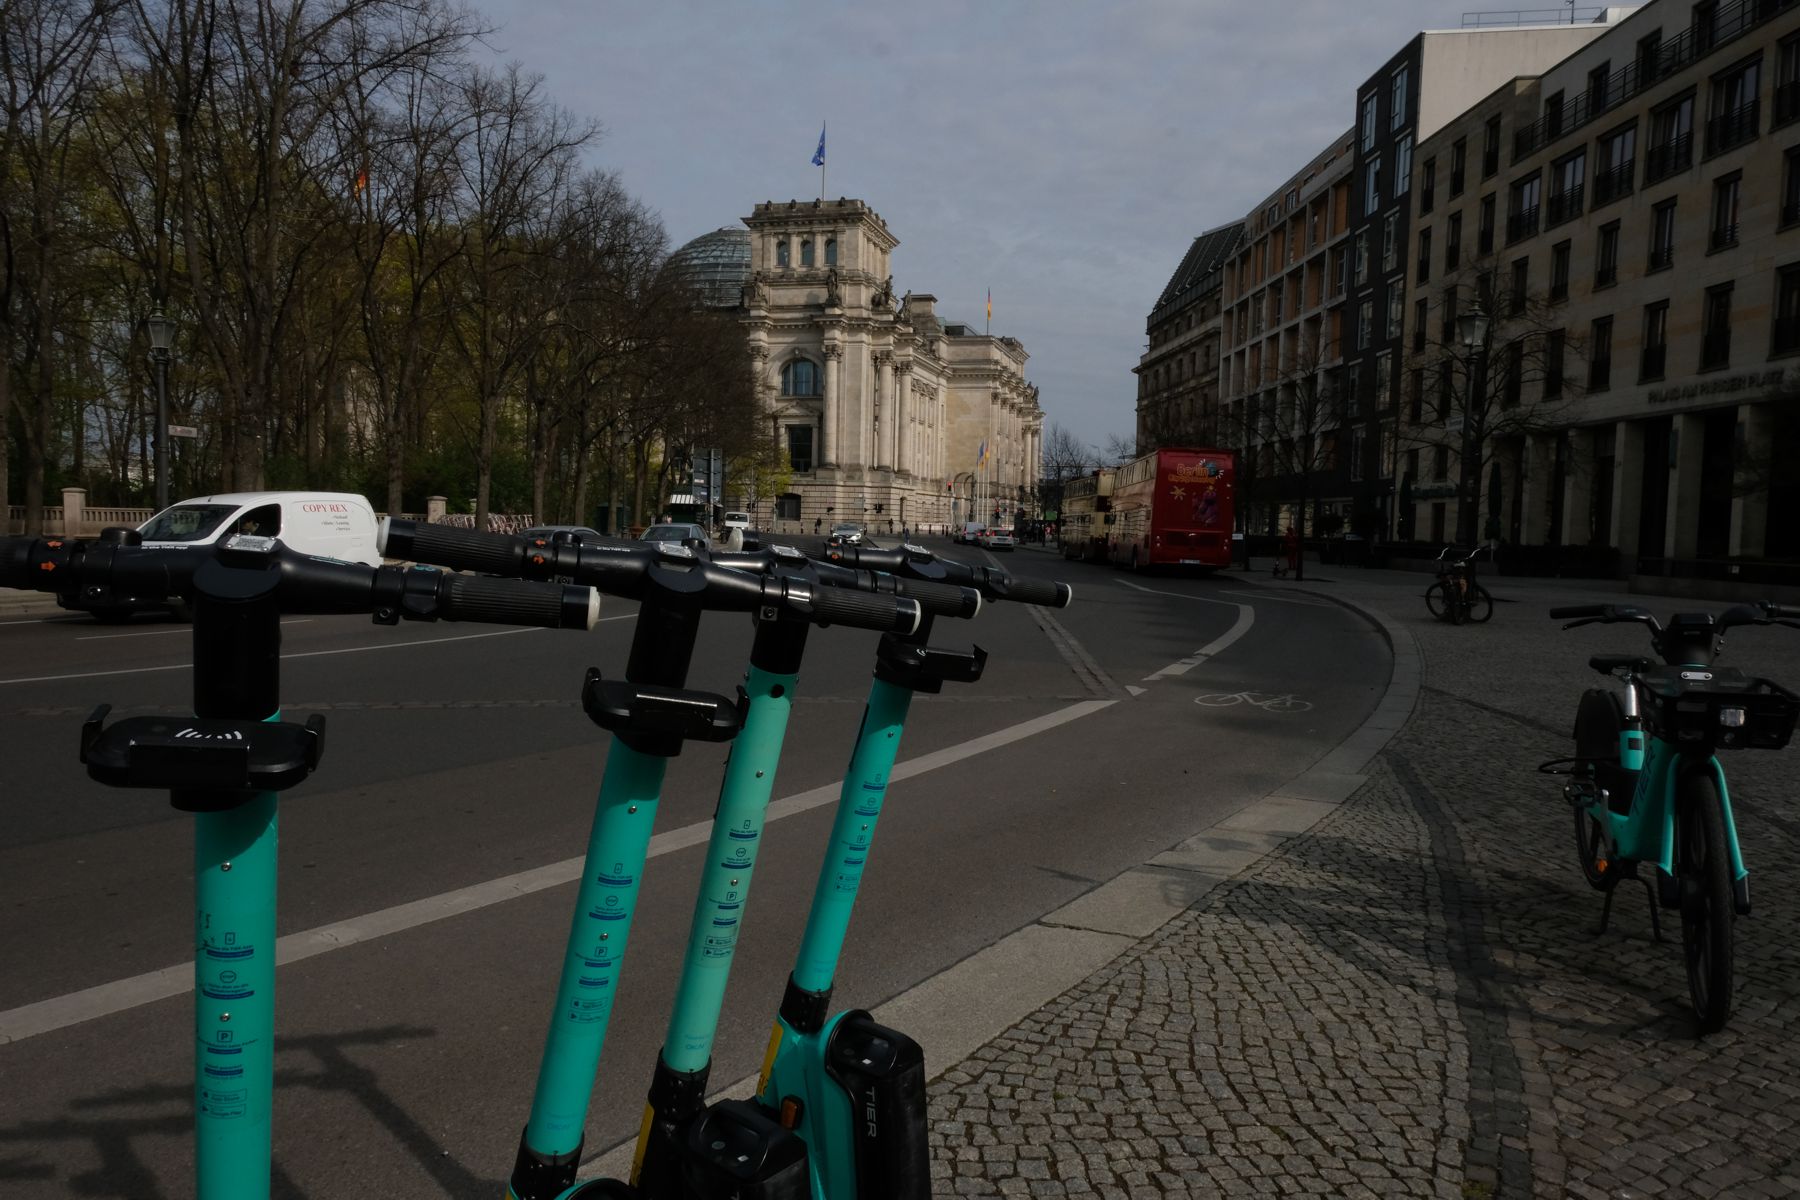 City behind scooters